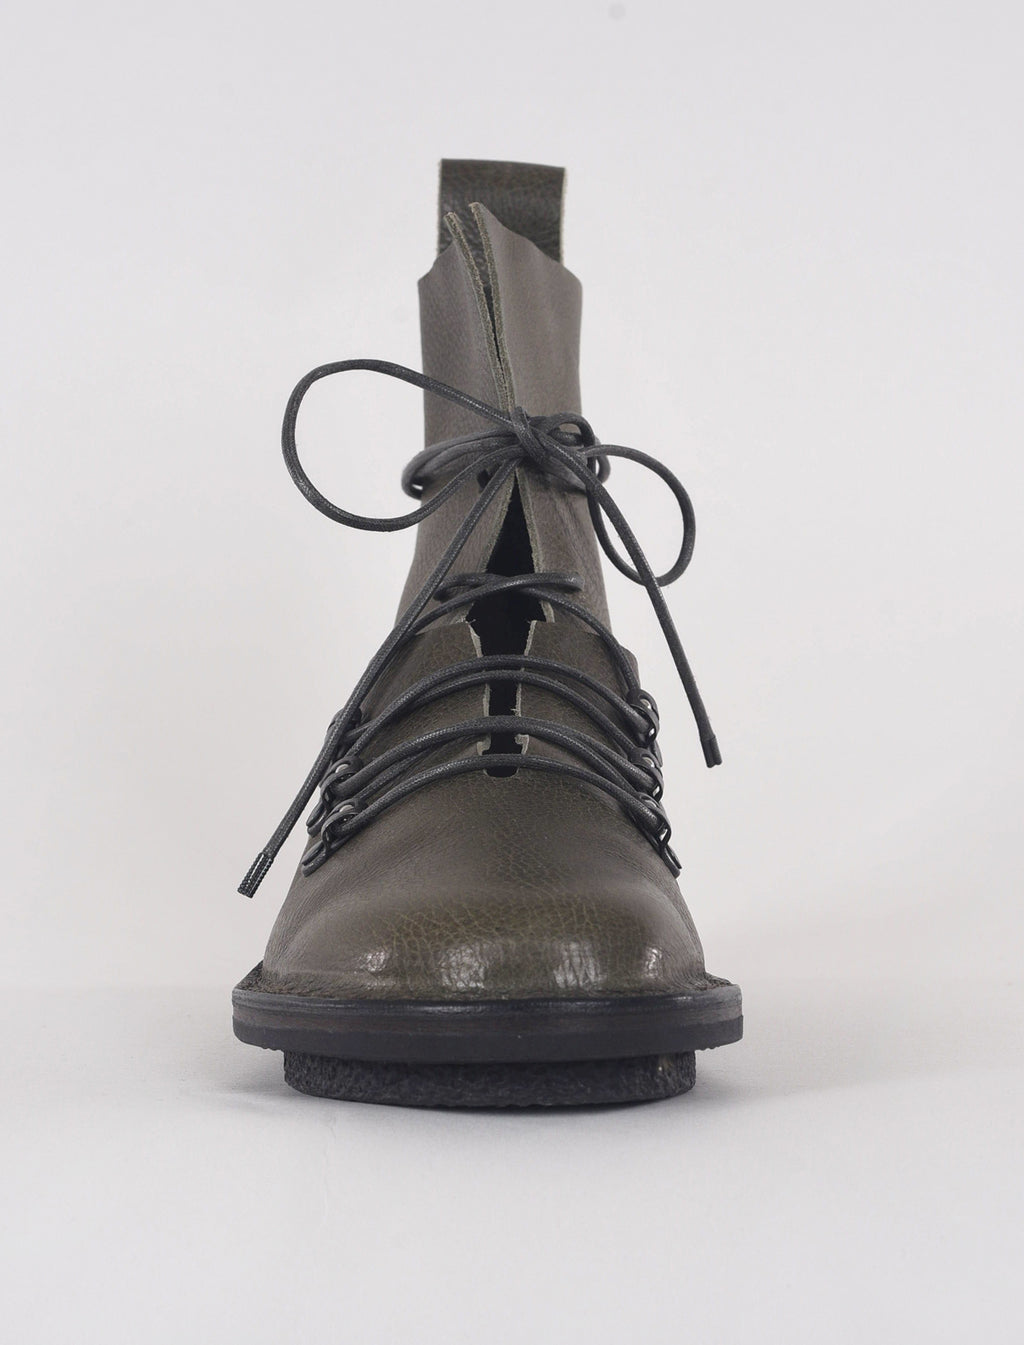 Trippen Shoes Standstill Closed Boot, Gray Waw 